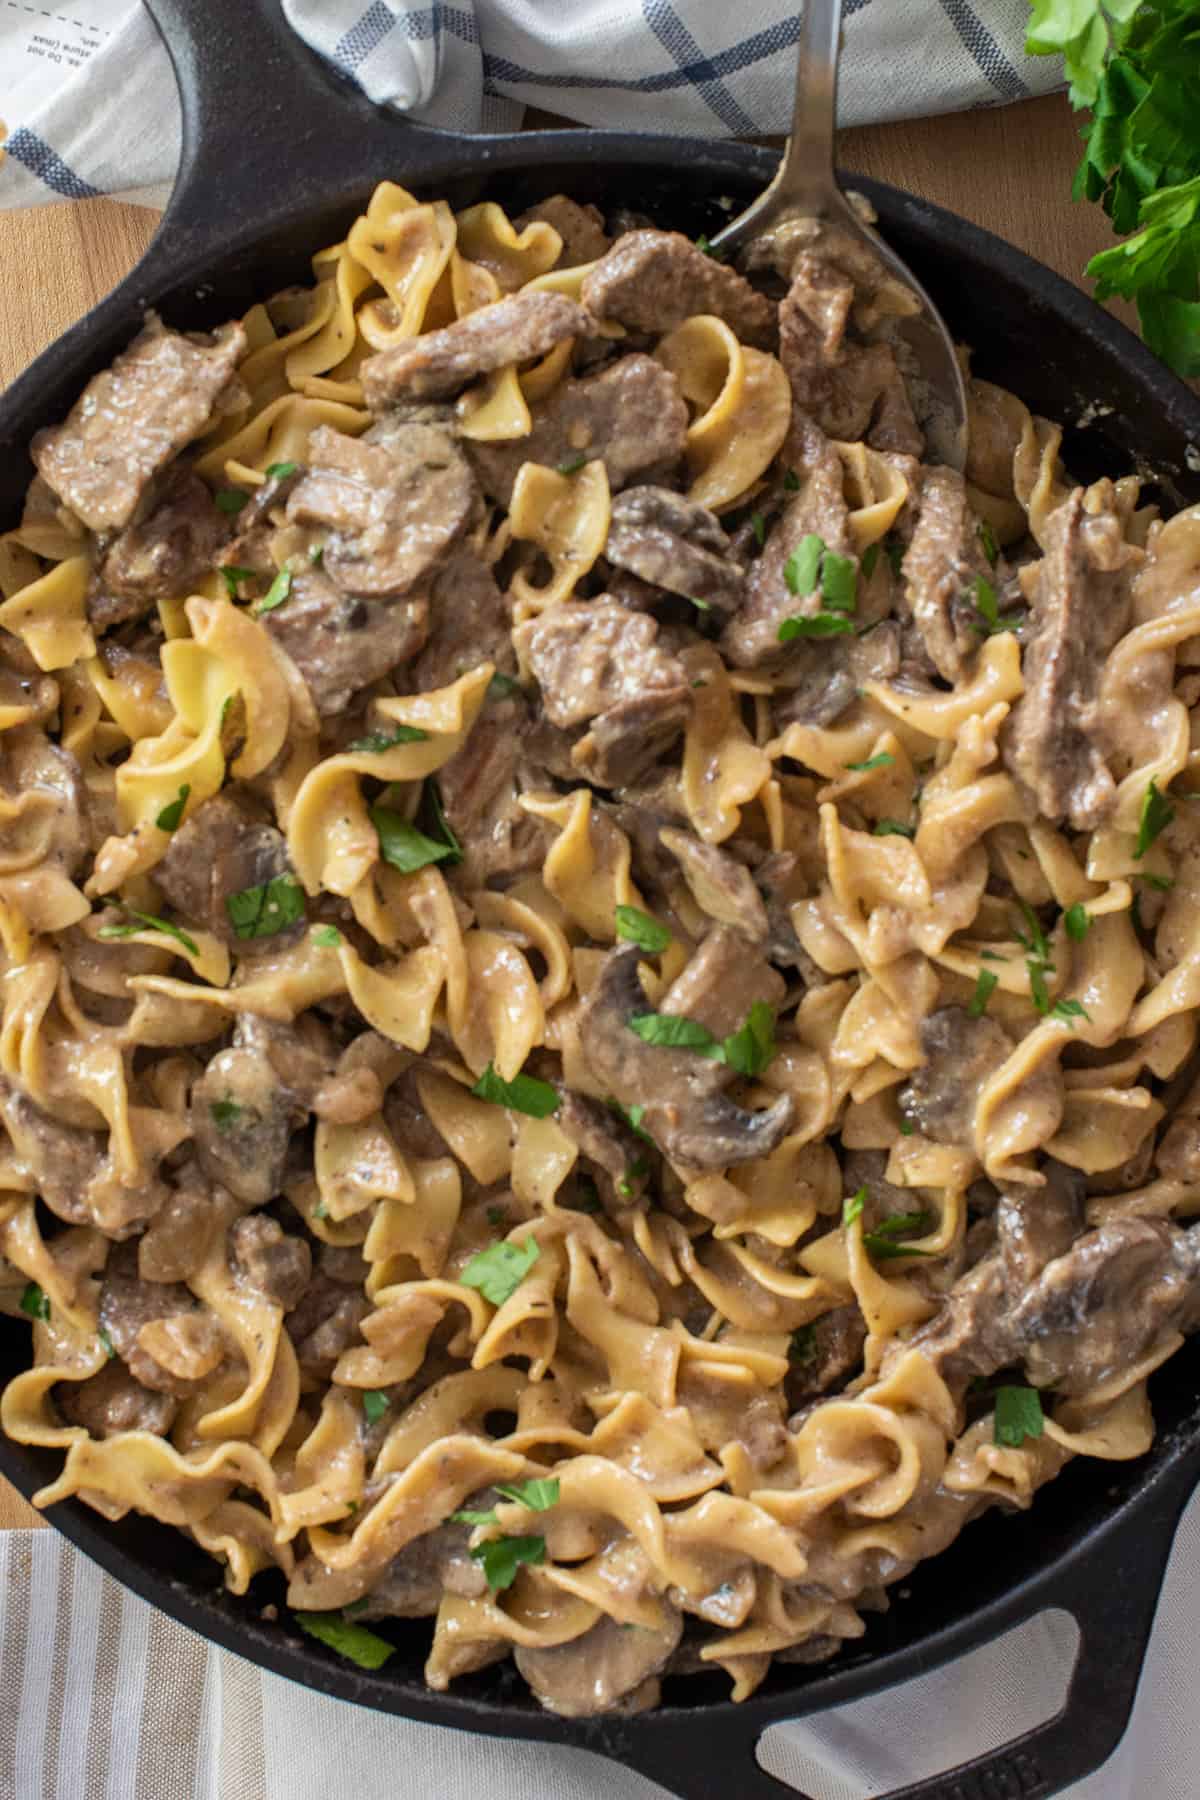 Beef Stroganoff with egg noodles in a pan ready for serving.